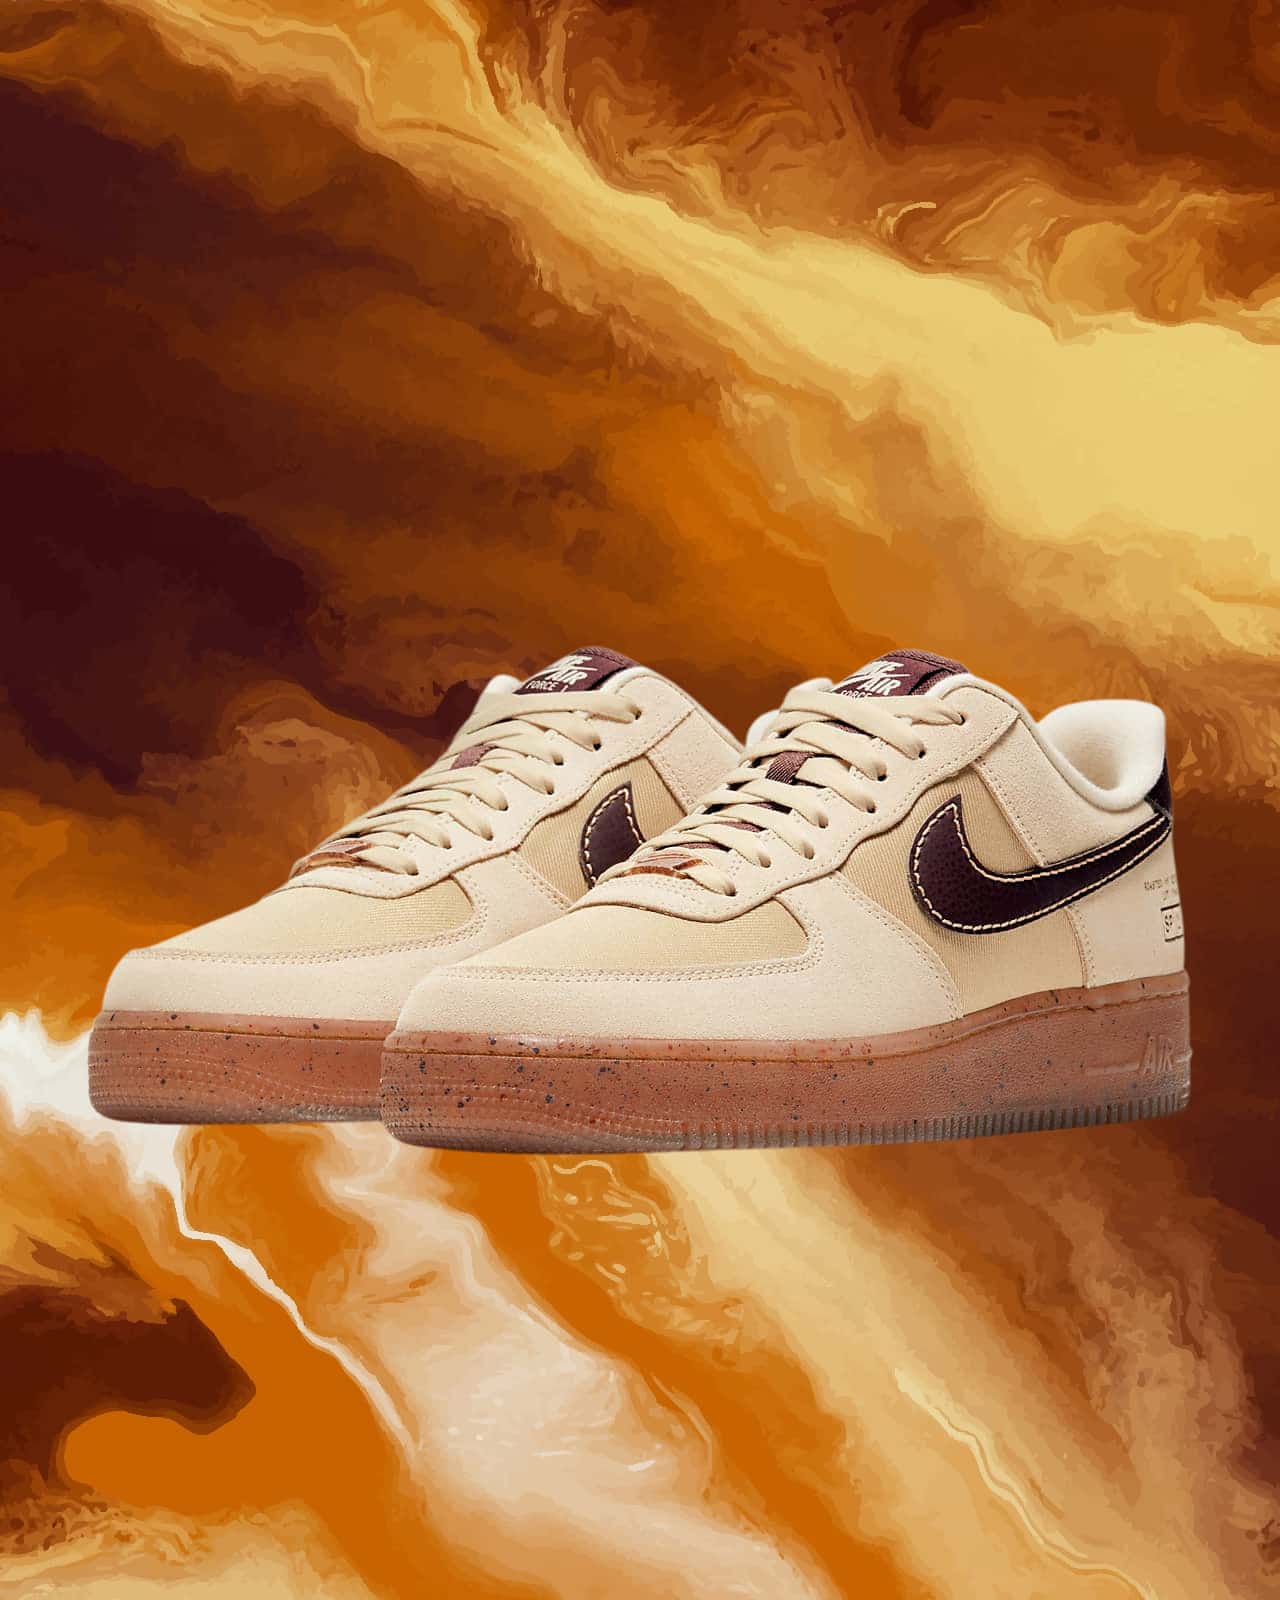 Nike Brewed Up an Air Force 1 “Coffee”